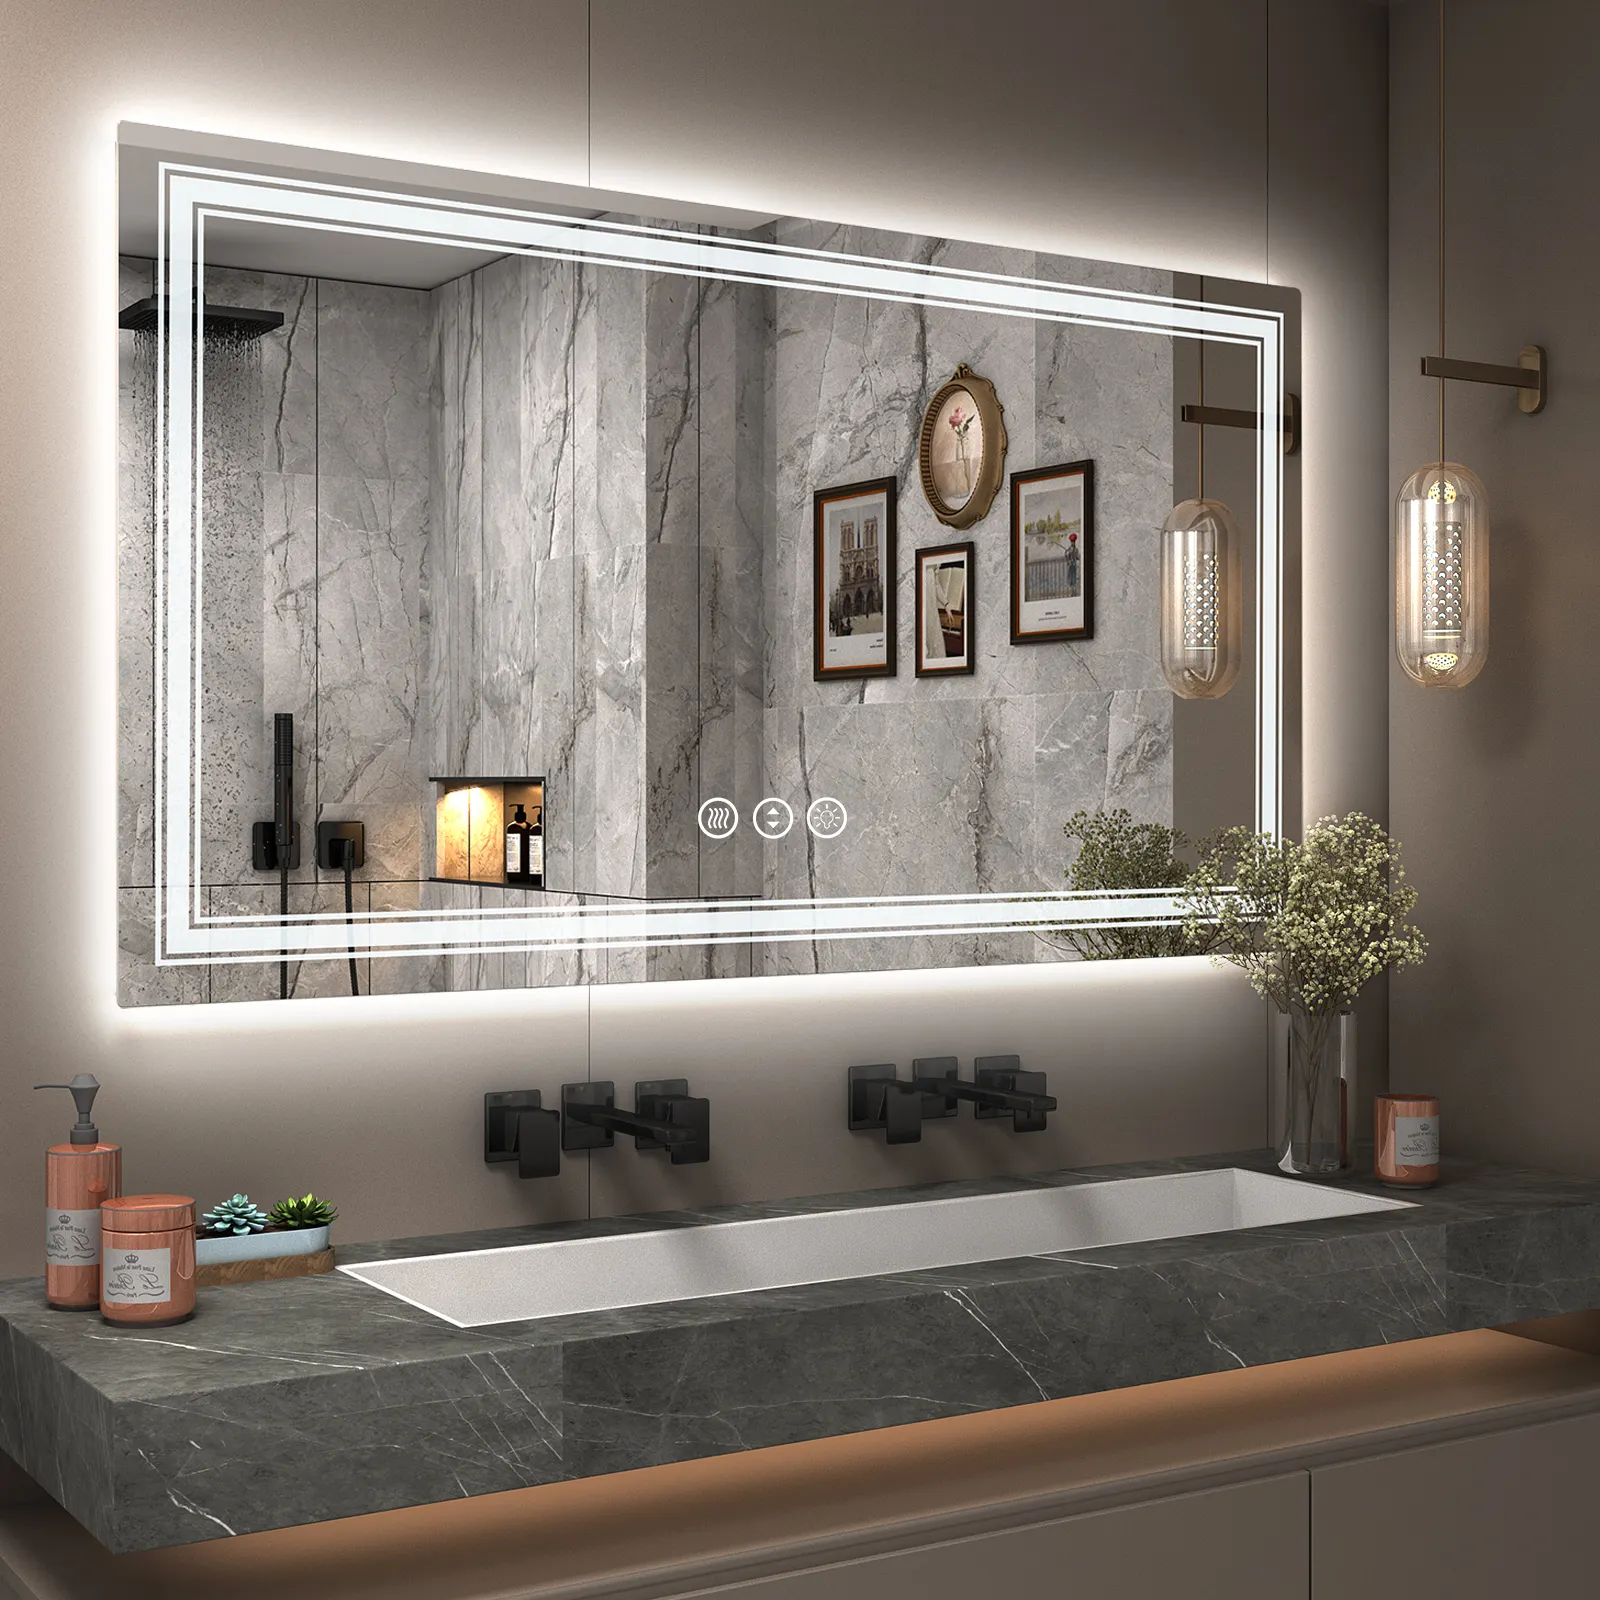 Electronic Demist Smart Led Bathroom Horizontal Hanging 3 Colors Changeable Tempered Bathroom Mirror